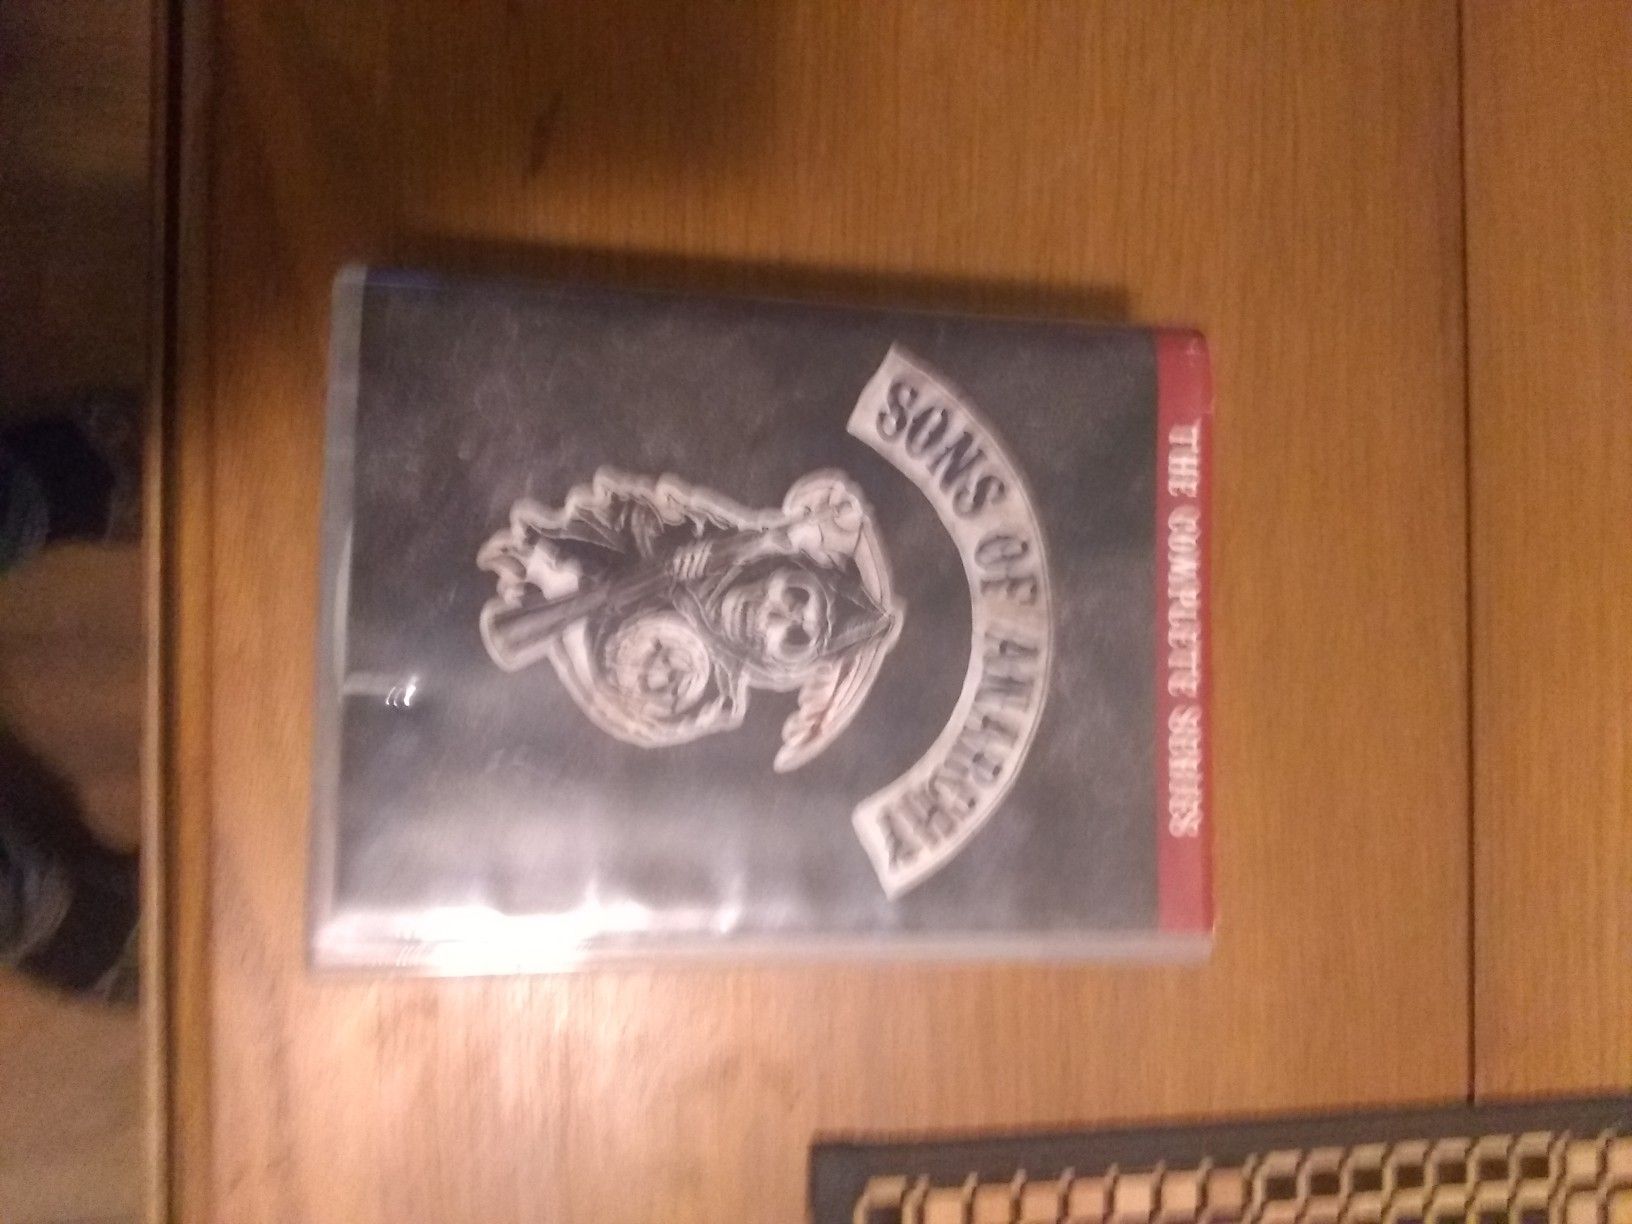 Sons of anarchy DVD complete series